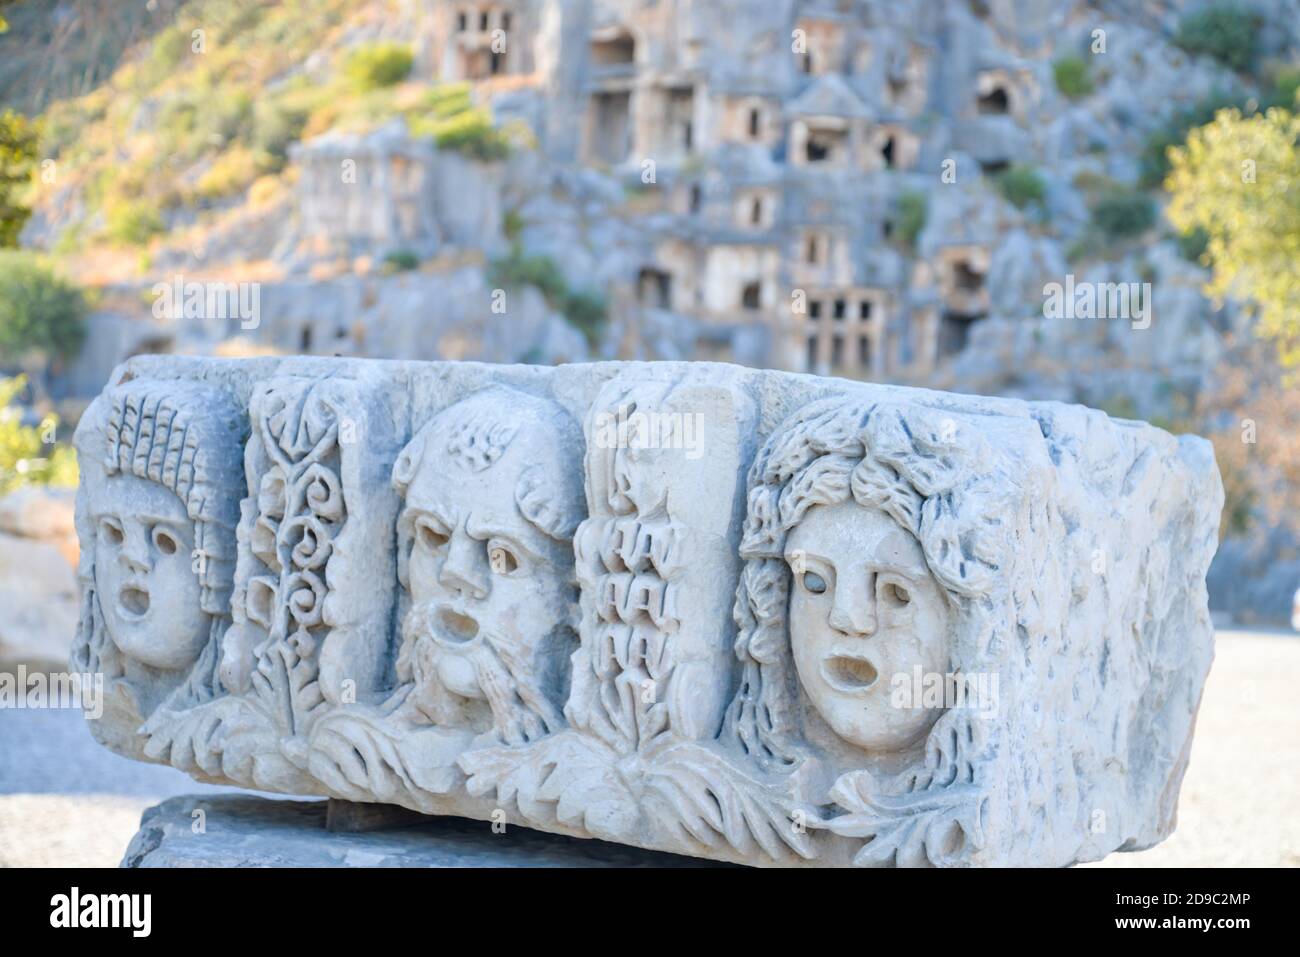 Ancient city of Myra. Turkey, The ancient city is famous for its rock tombs and relief masks. Stock Photo